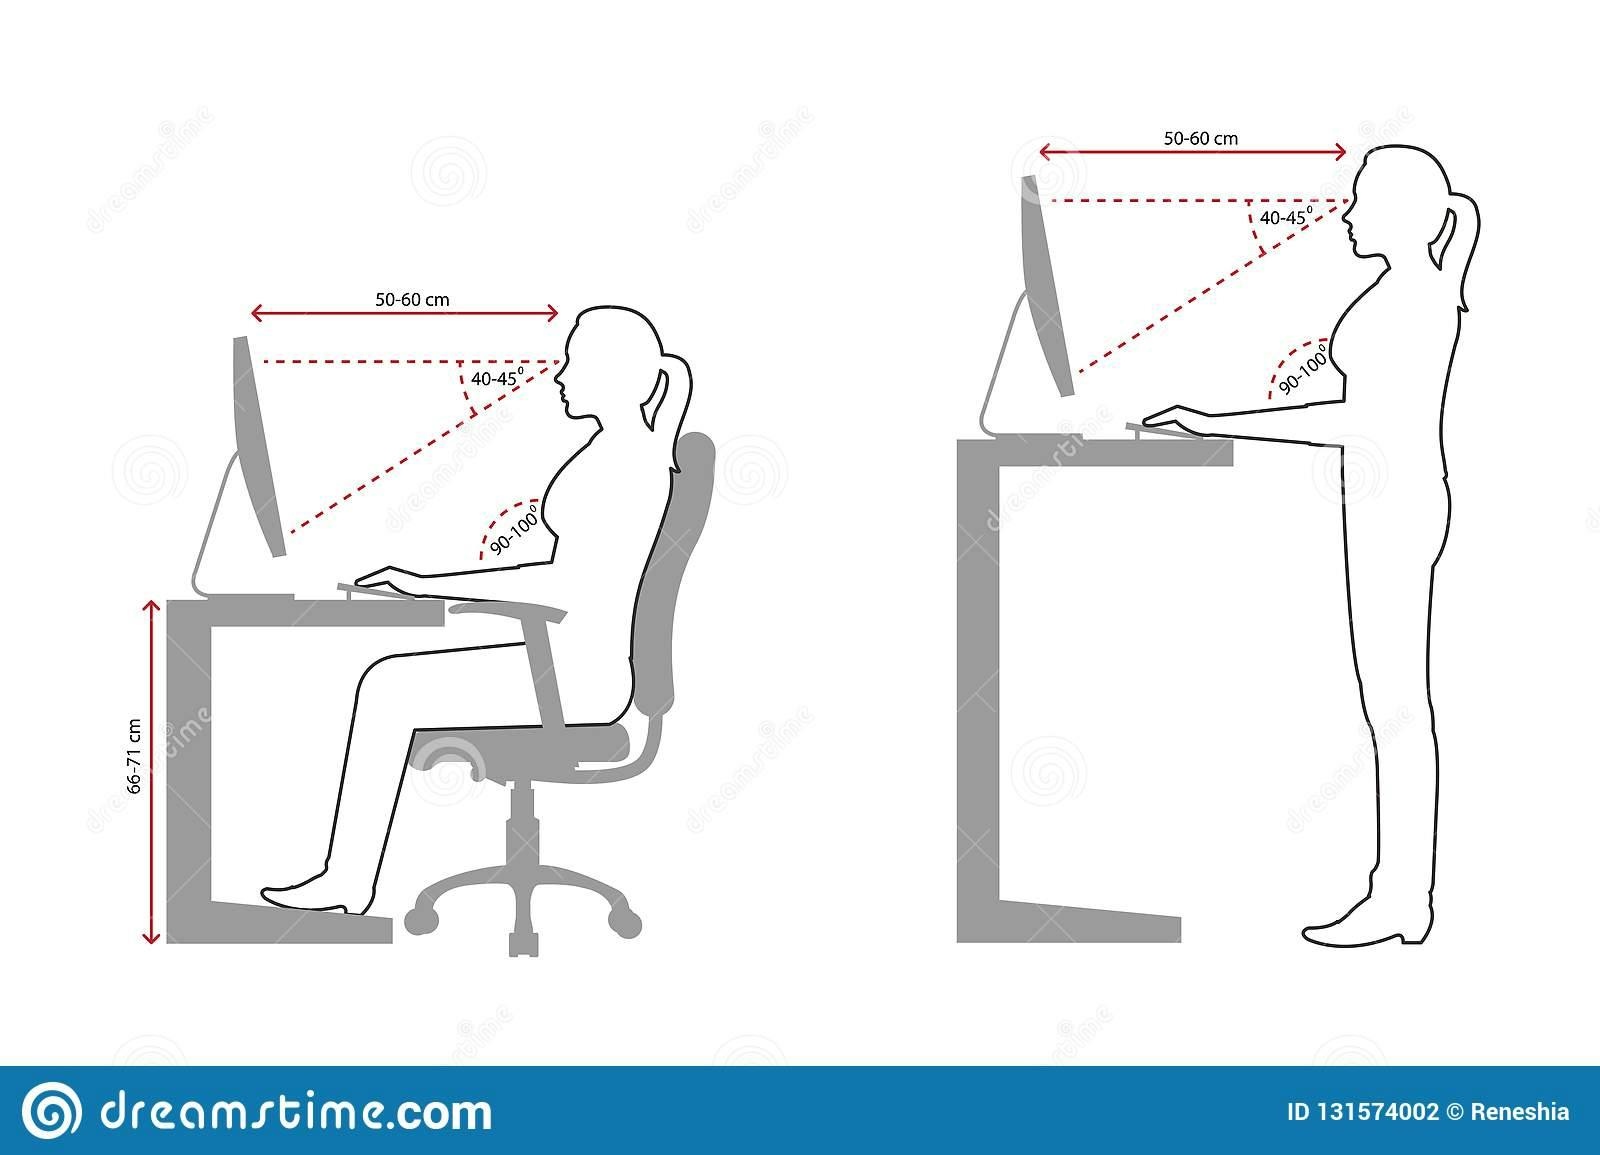 Sit and stand posture